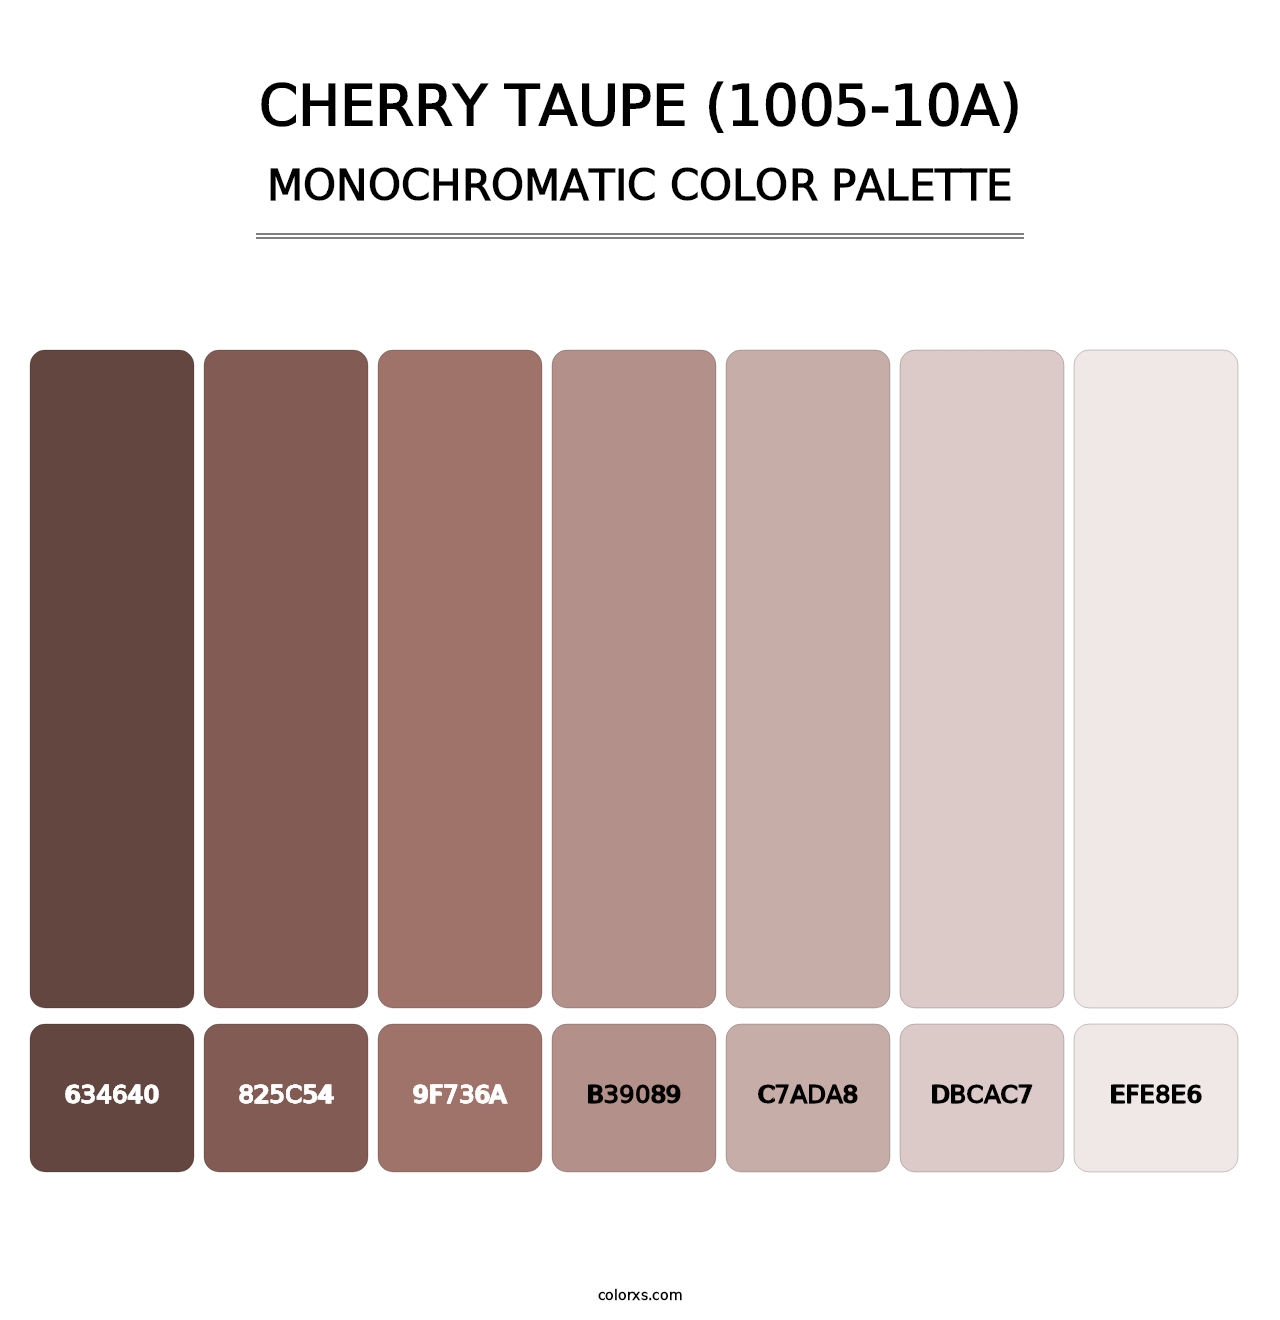 Cherry Taupe (1005-10A) - Monochromatic Color Palette